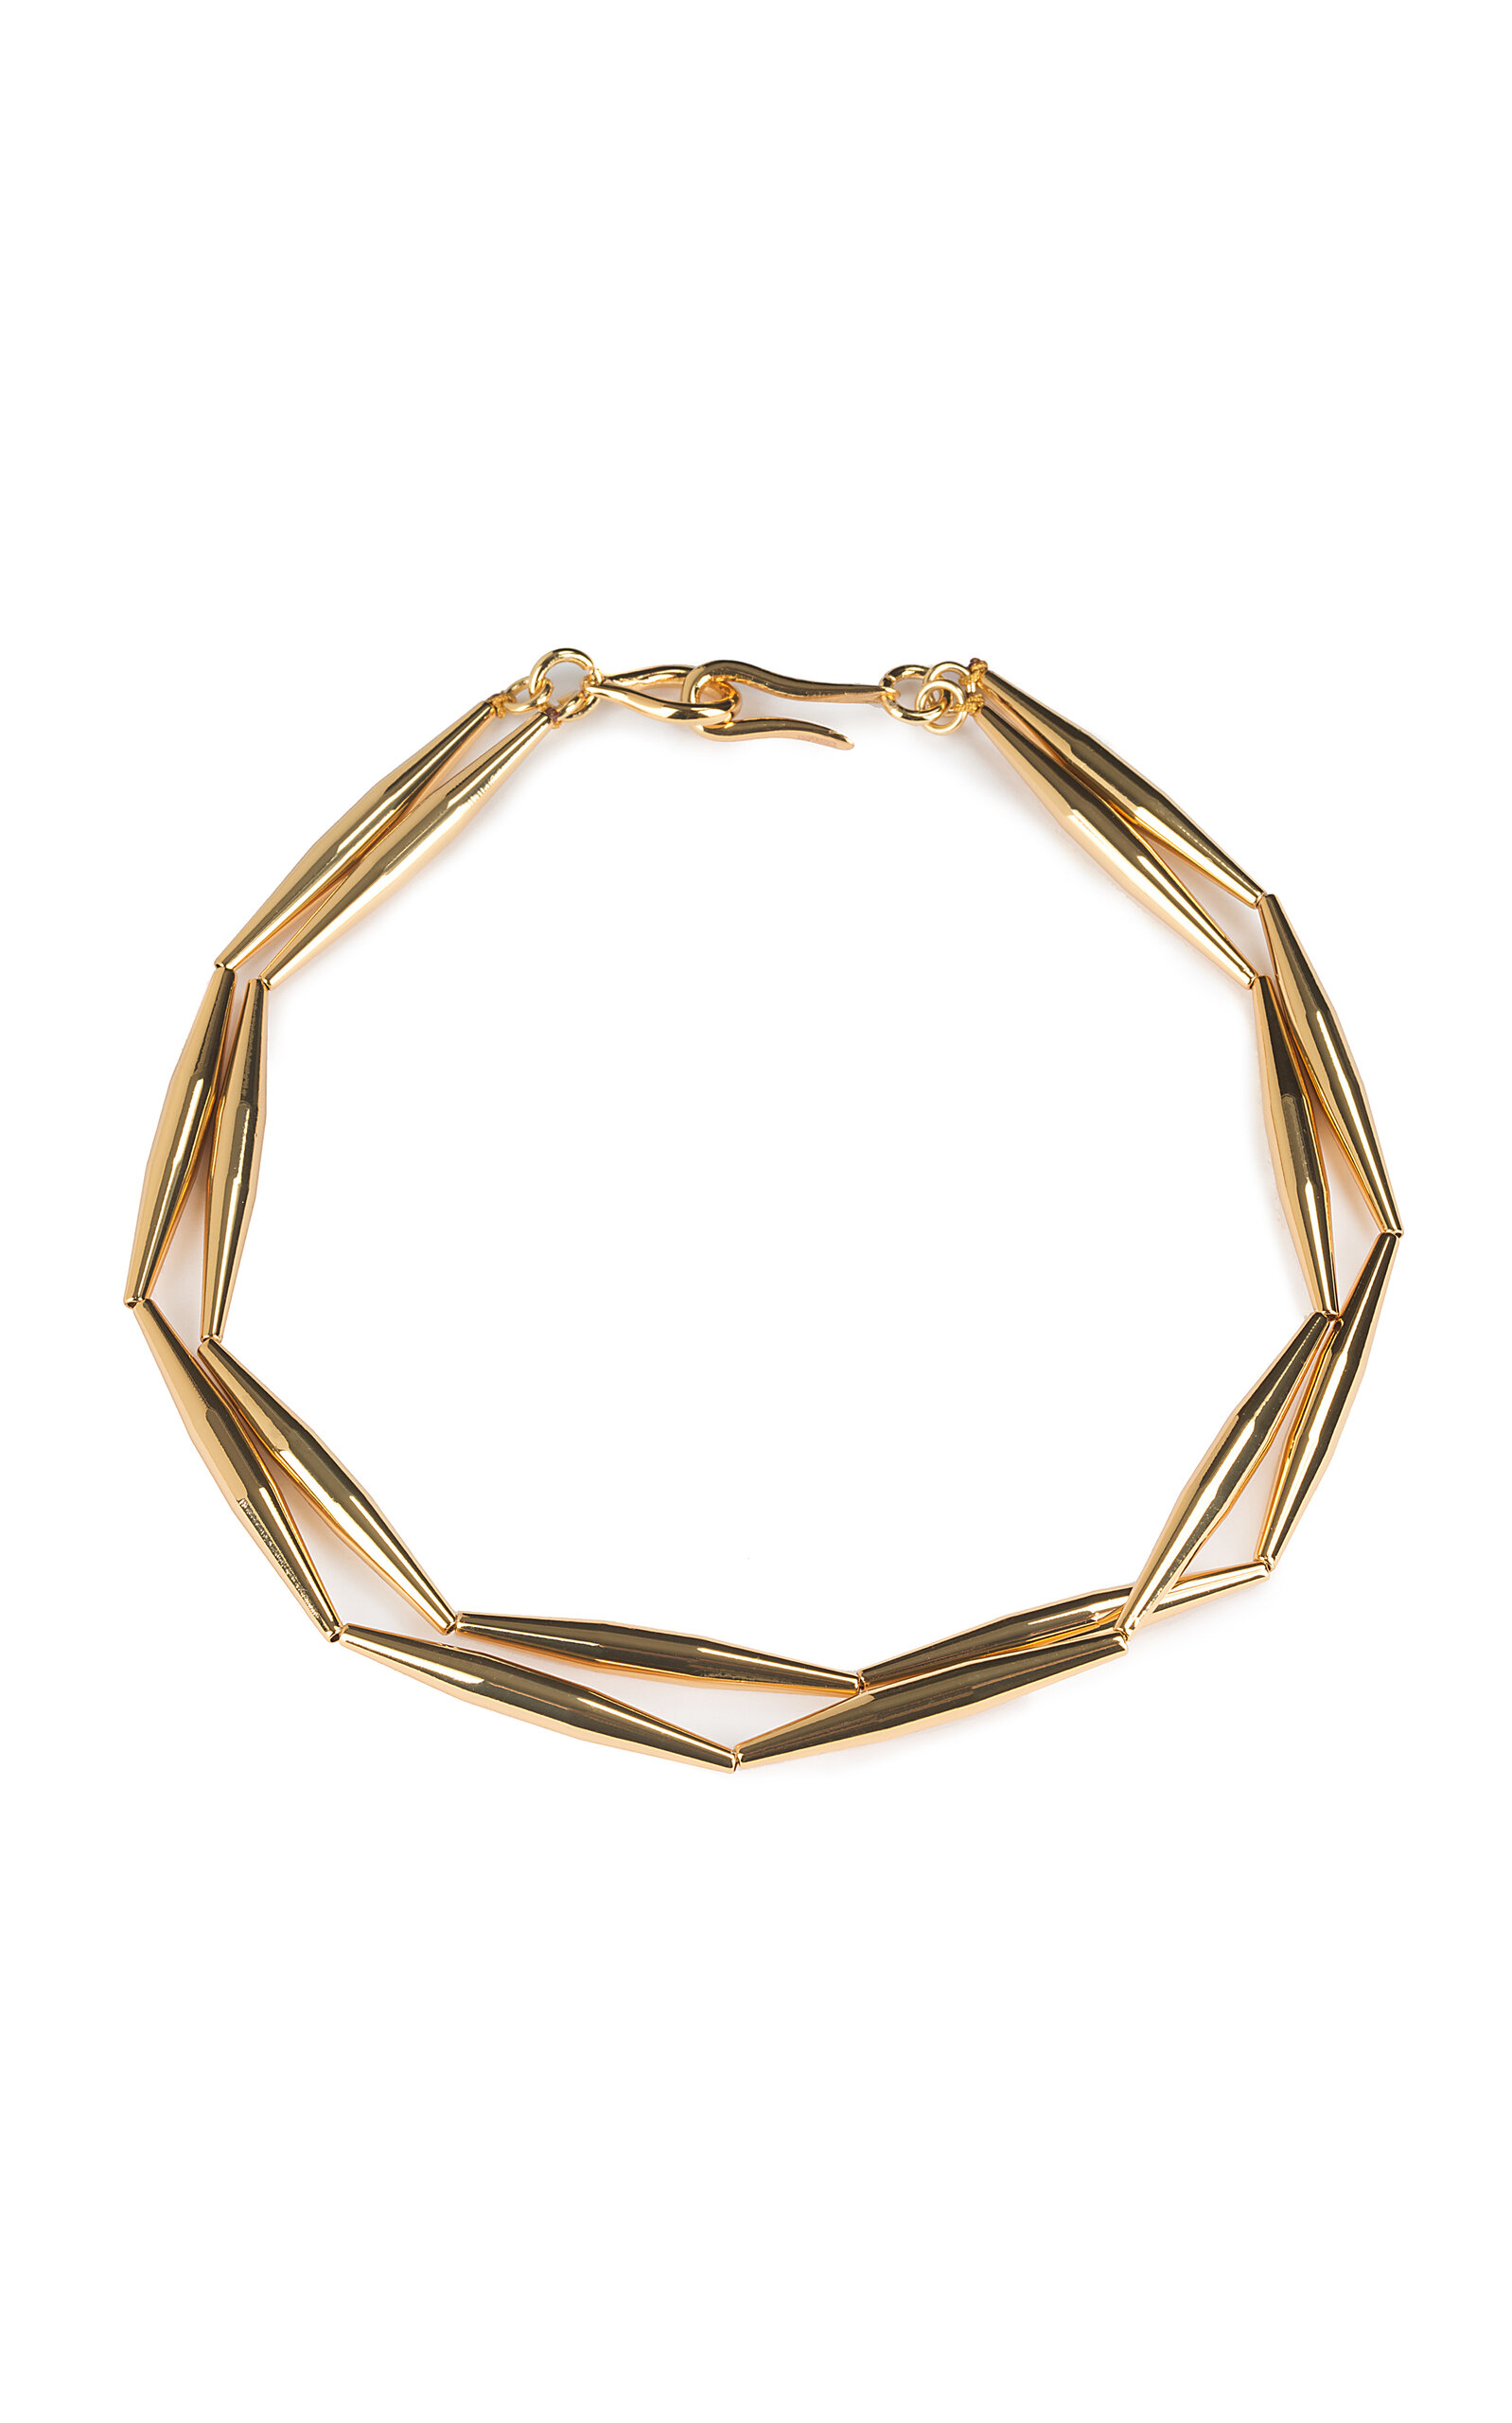 Helia Duo 24k Gold-Plated Necklace